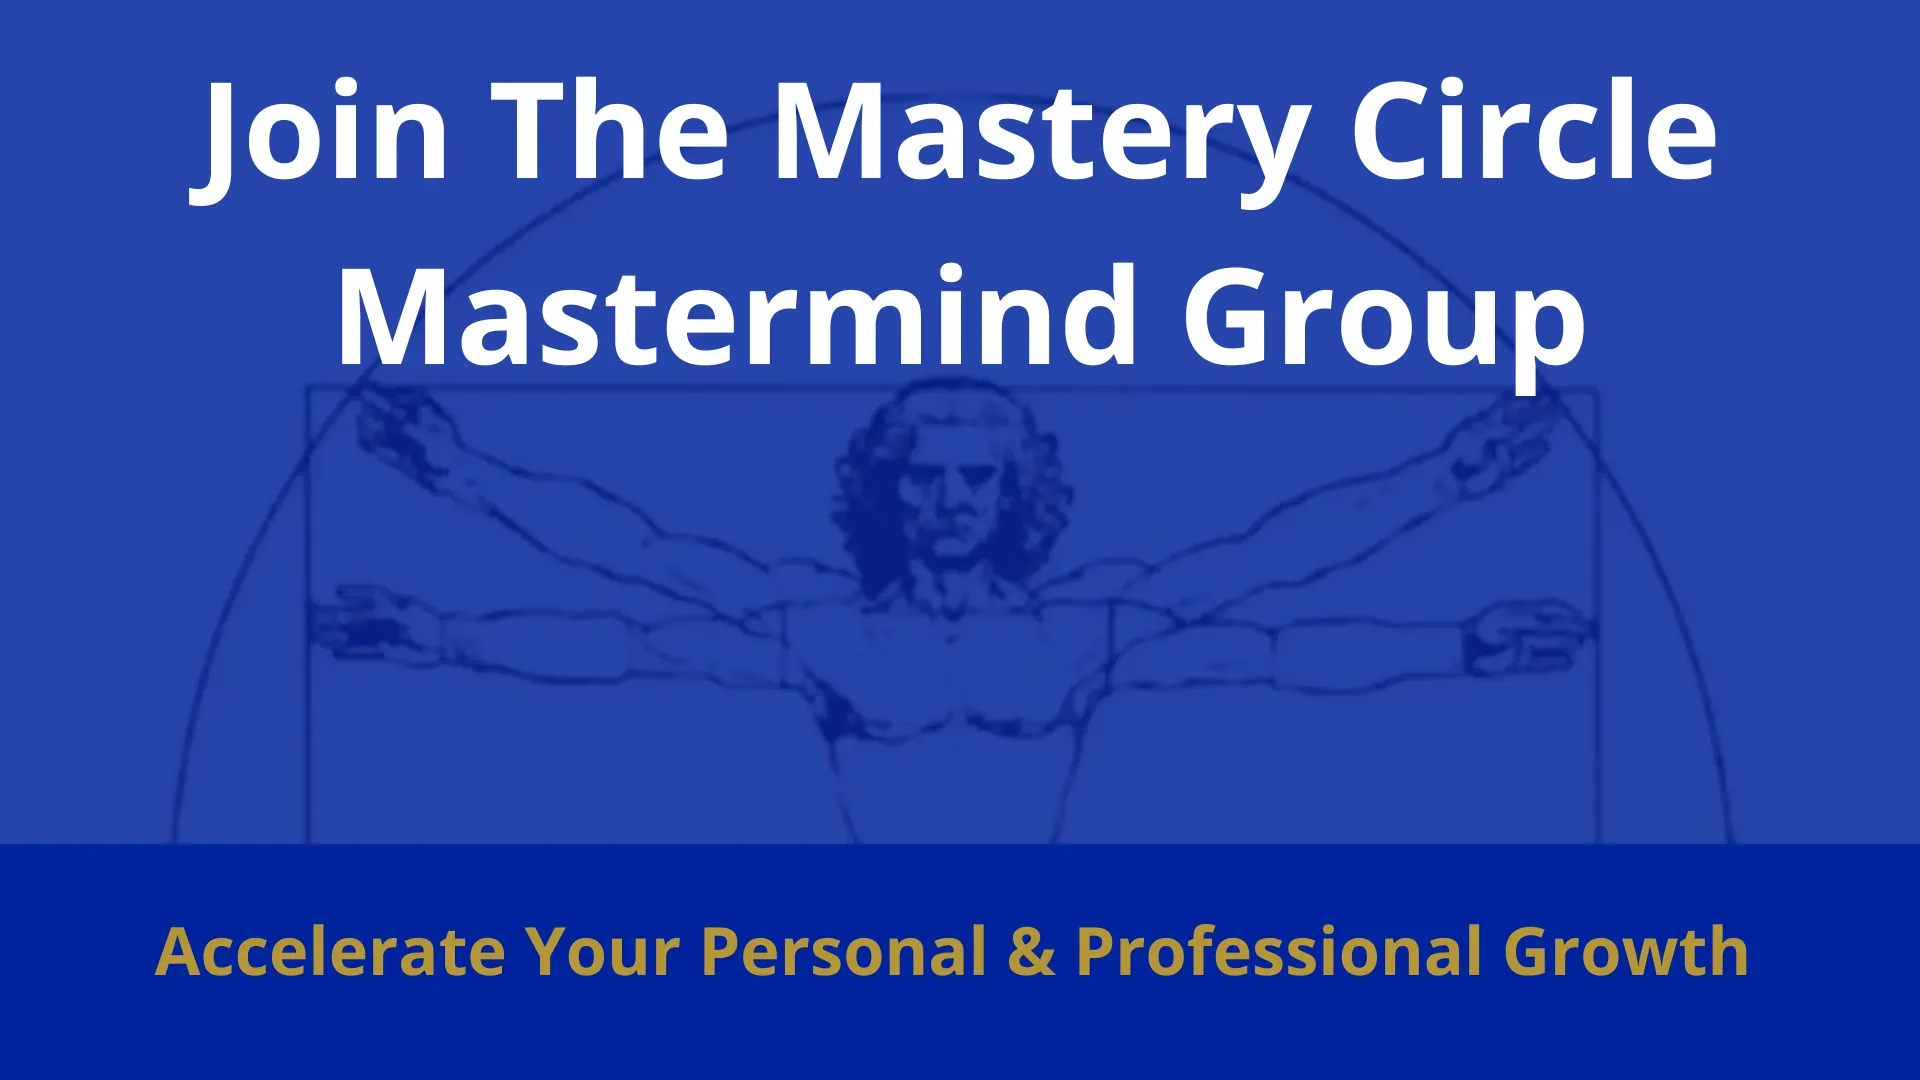 The Mastery Circle Mastermind Group